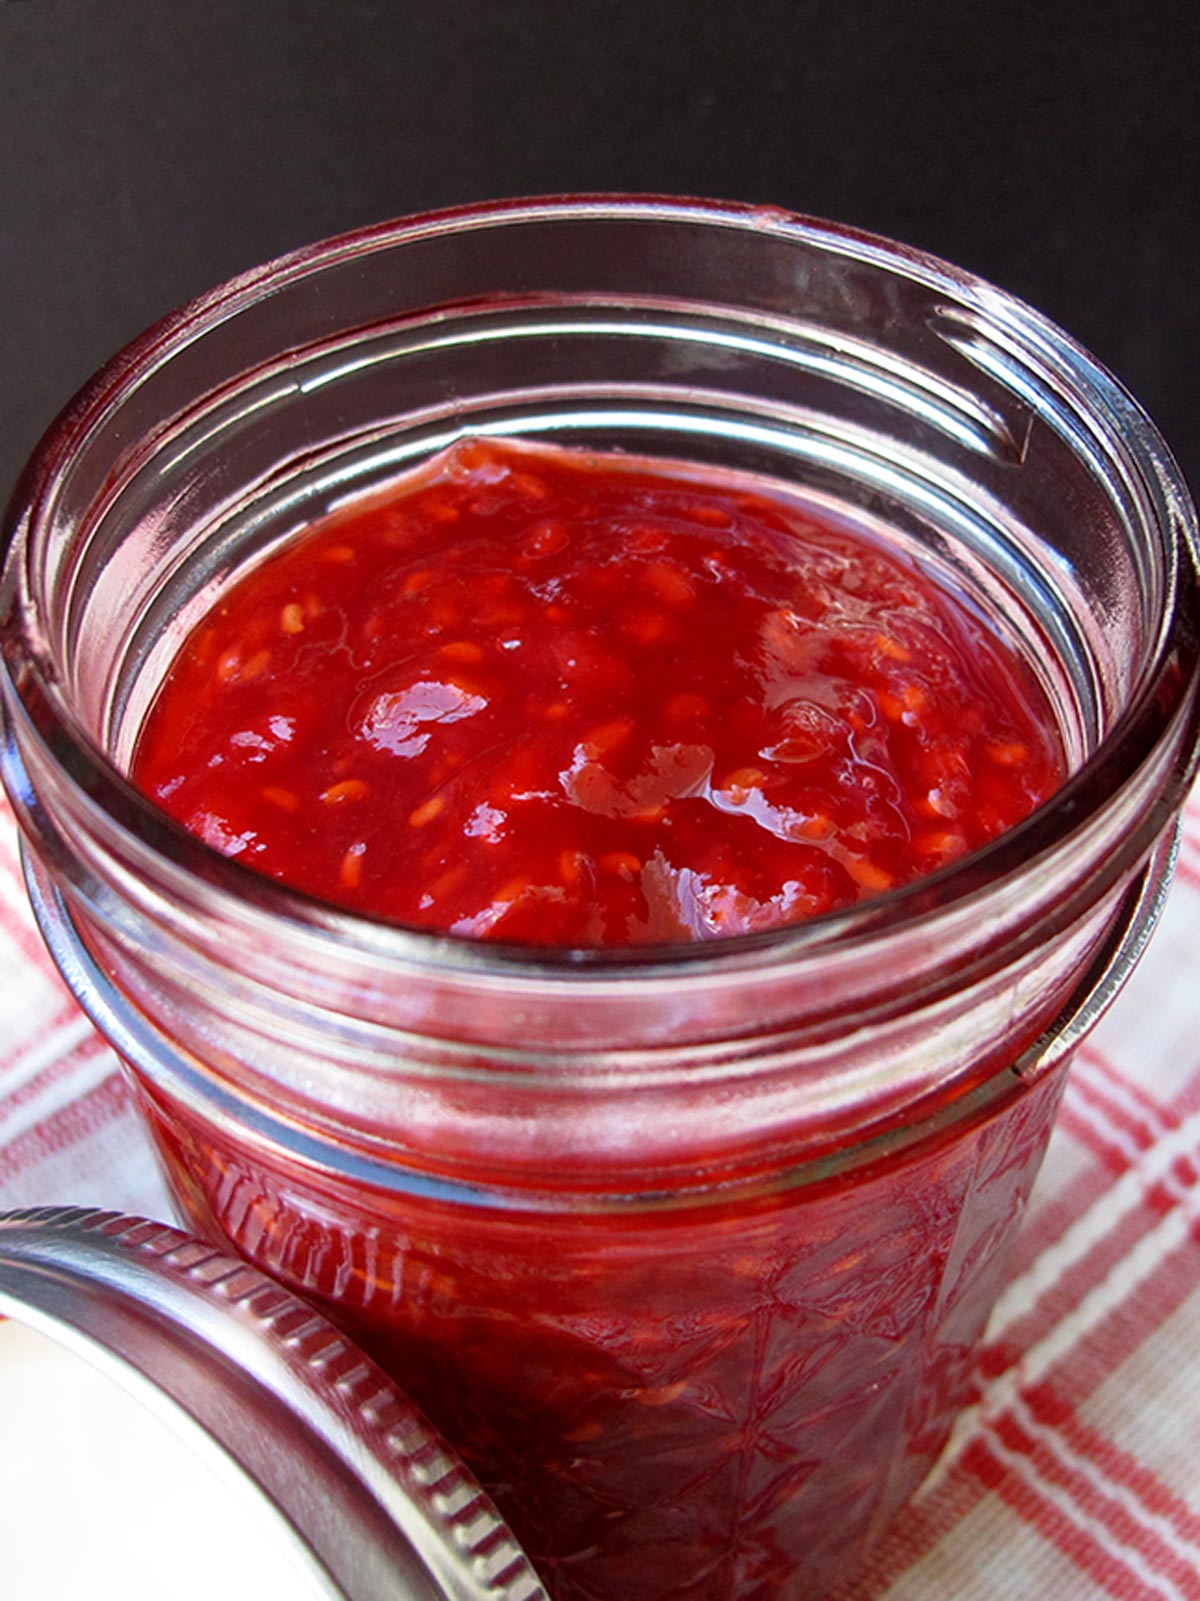 Raspberry apricot jam in glass jar with the cover off.